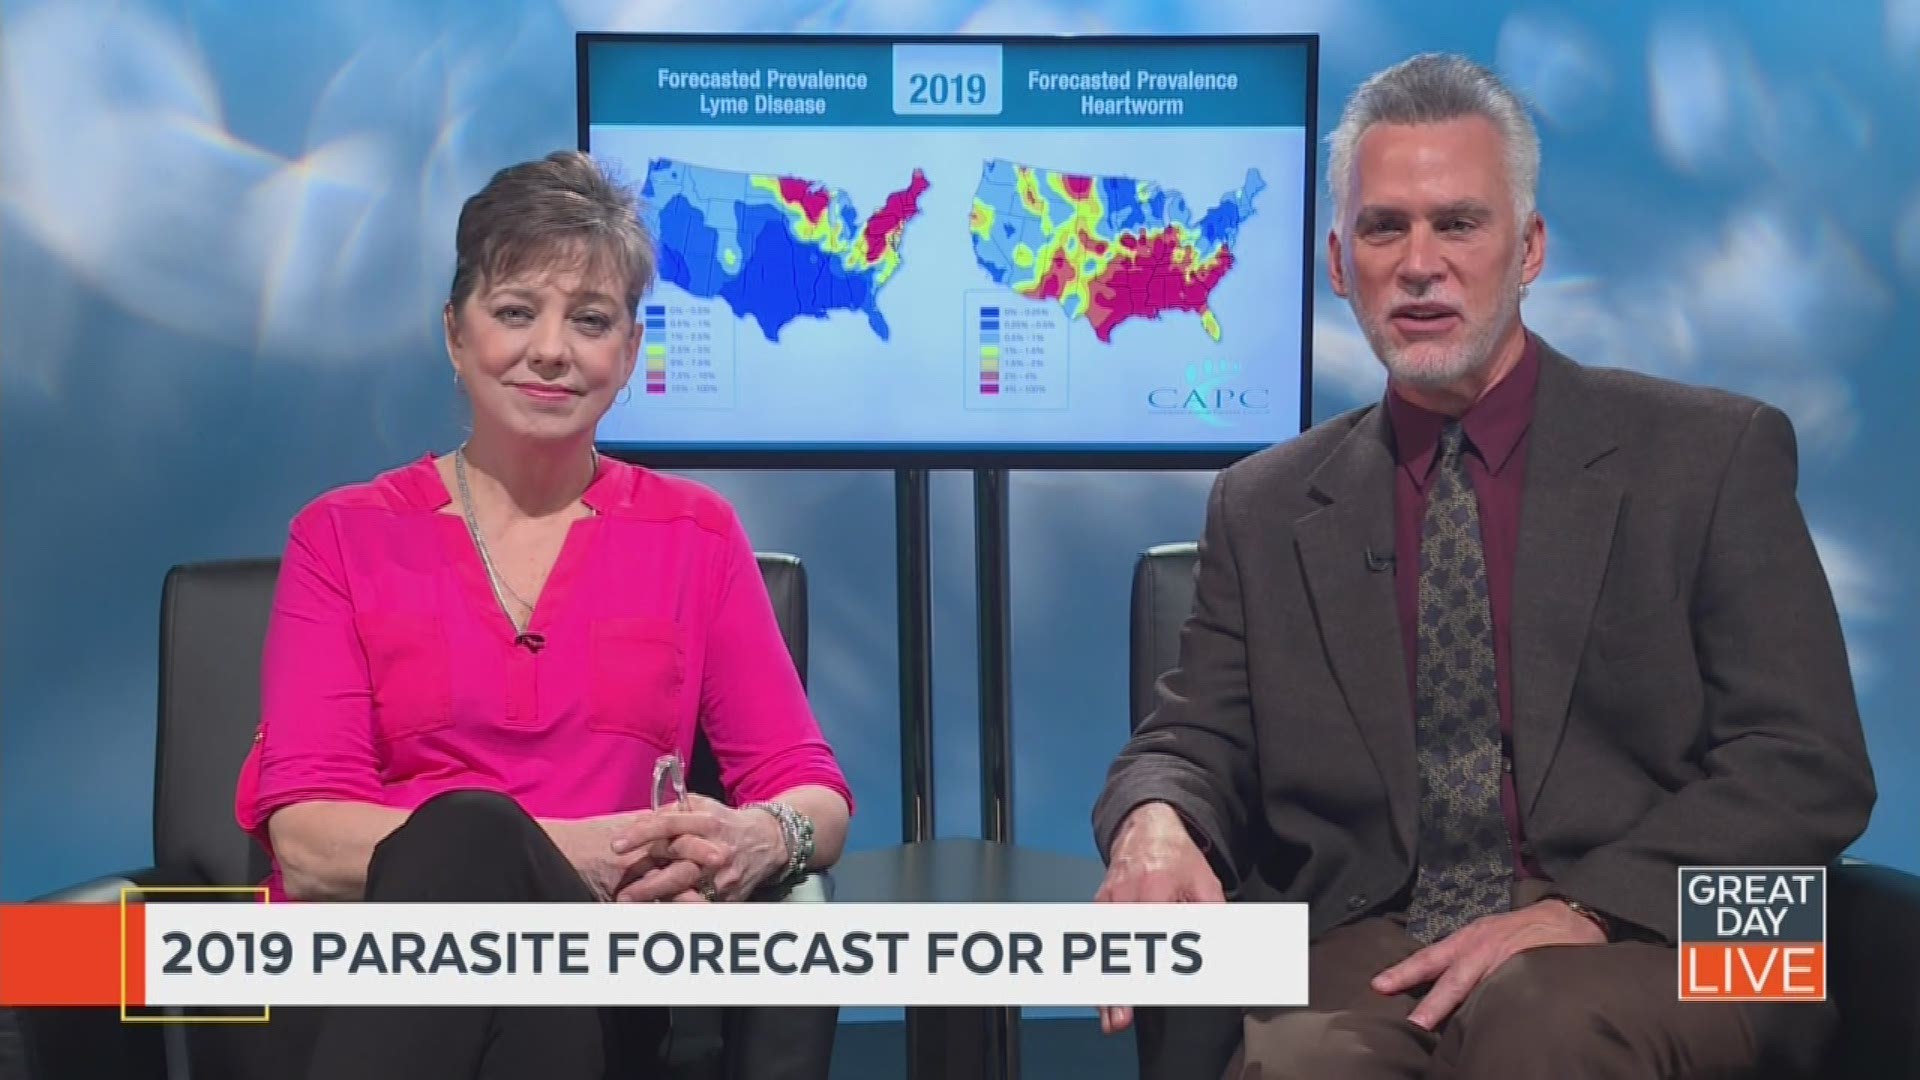 To learn more about what you should be concerned about this year in your area and how to keep your pets safe, visit capcvet.org.